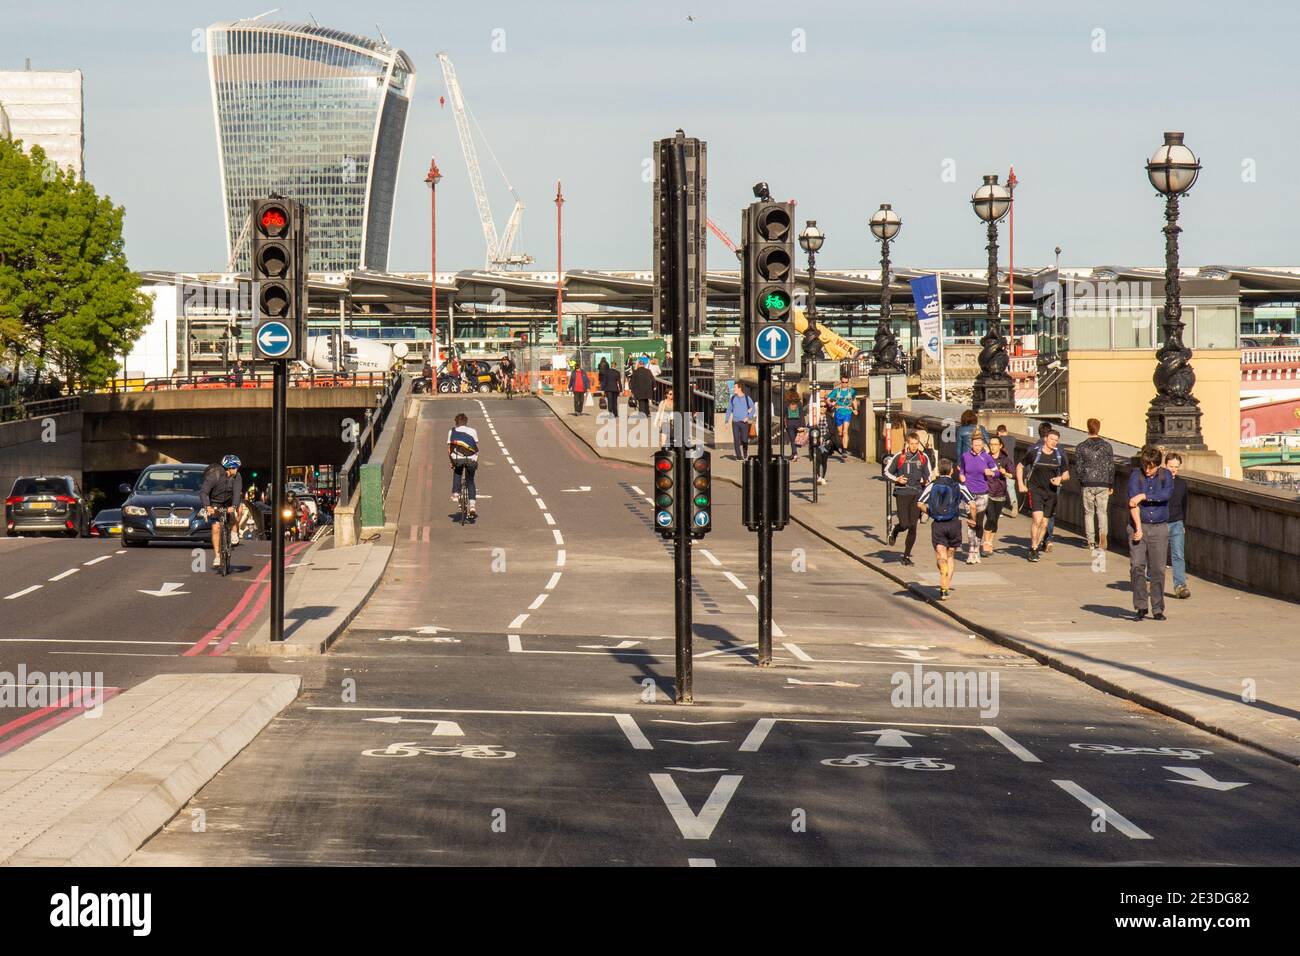 Cyclists try out a nearly completed section of the new Cycle Superhighway 3 on London's Embankment, featuring cycle tracks separated from motor traffi Stock Photo